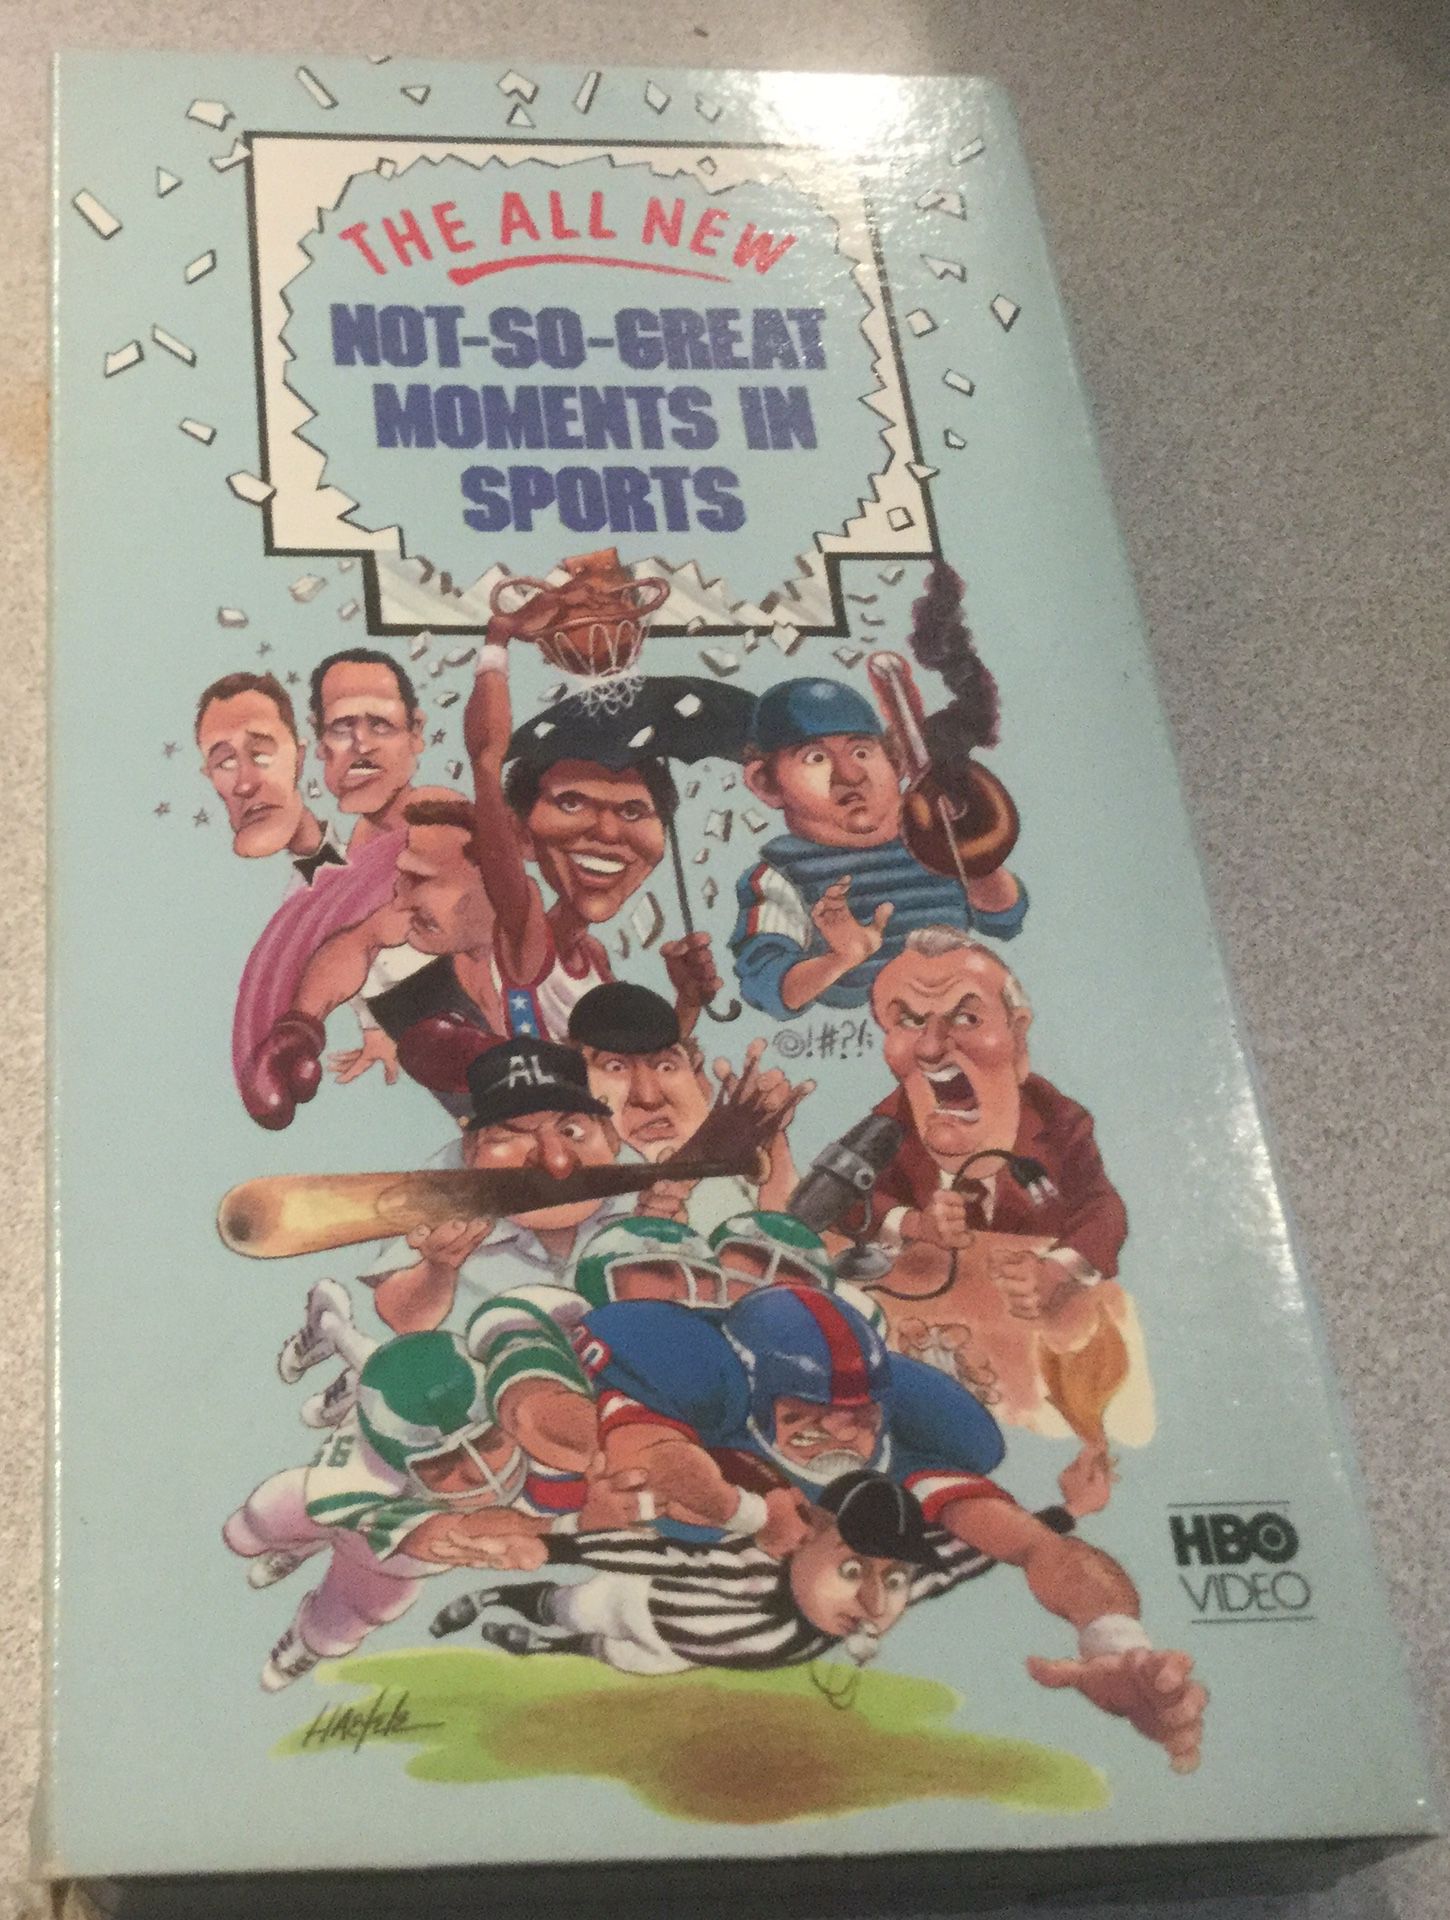 The All New Not-So-Breat Moments in Sports VHS TAPE